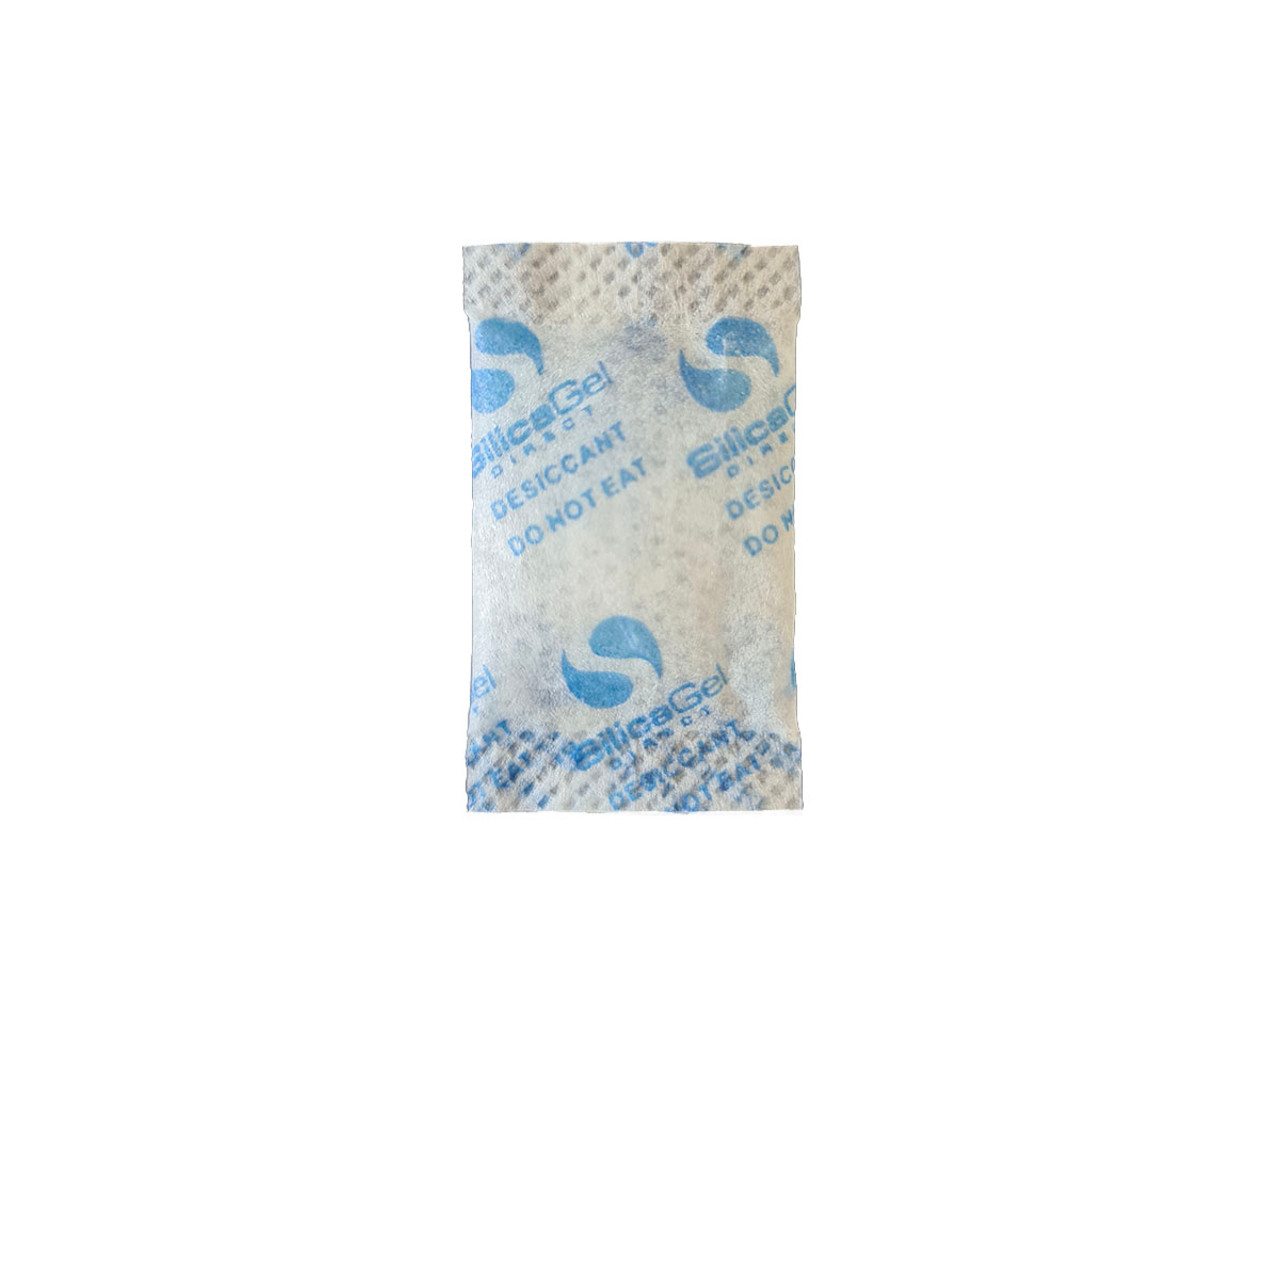 0.5gm Silica Gel Moisture Absorber Aiwa Paper Desiccant Packets 